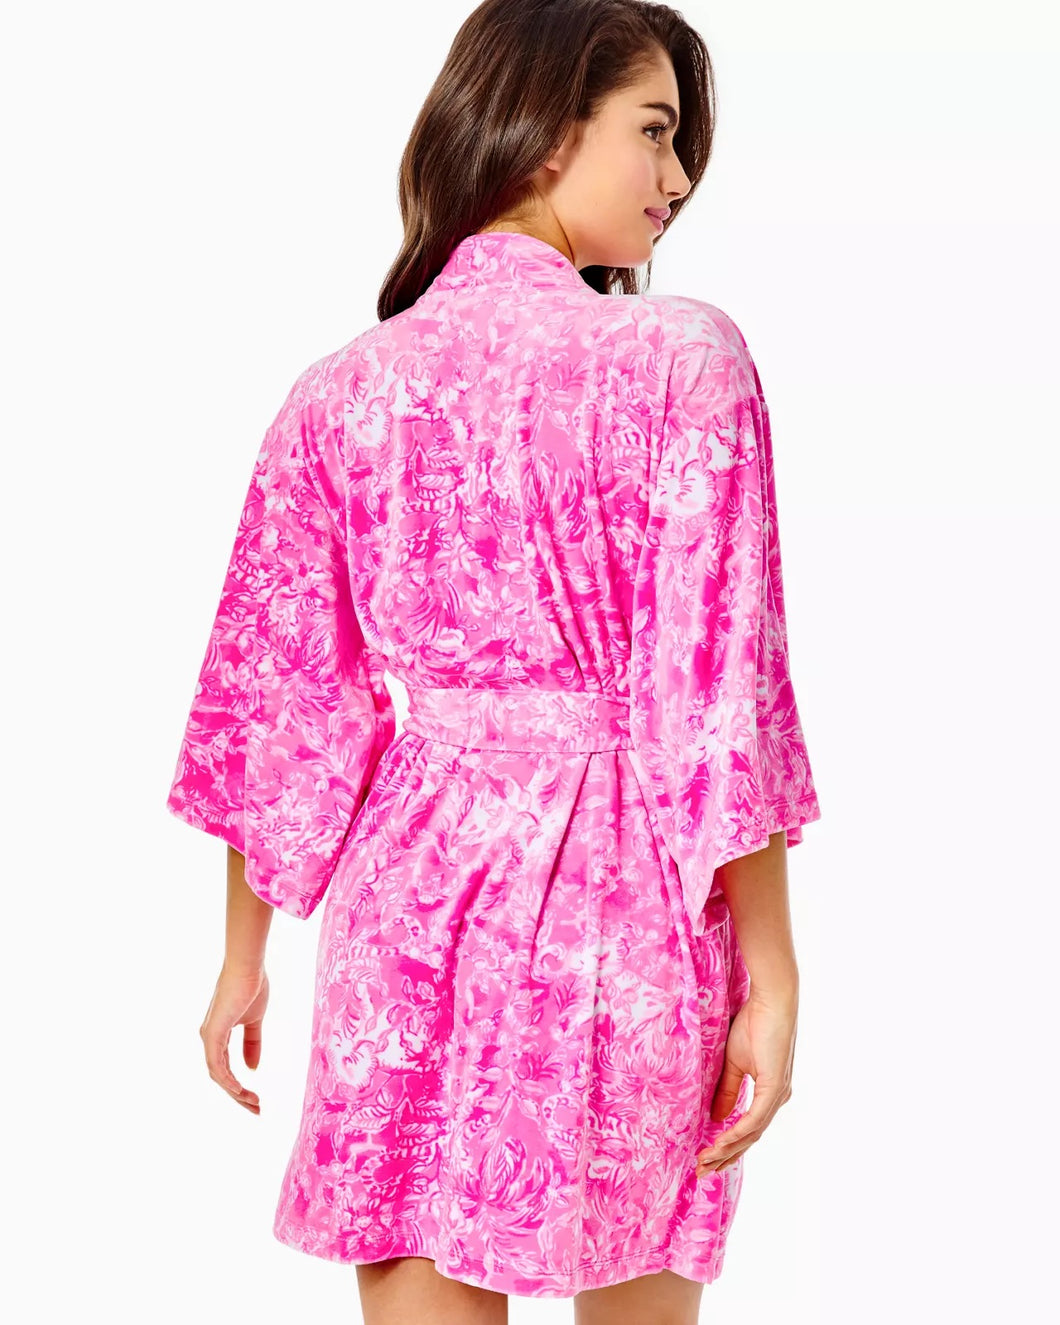 Elaine Velour Robe Plumeria Pink Purposefully Pink by Lilly Pulitzer